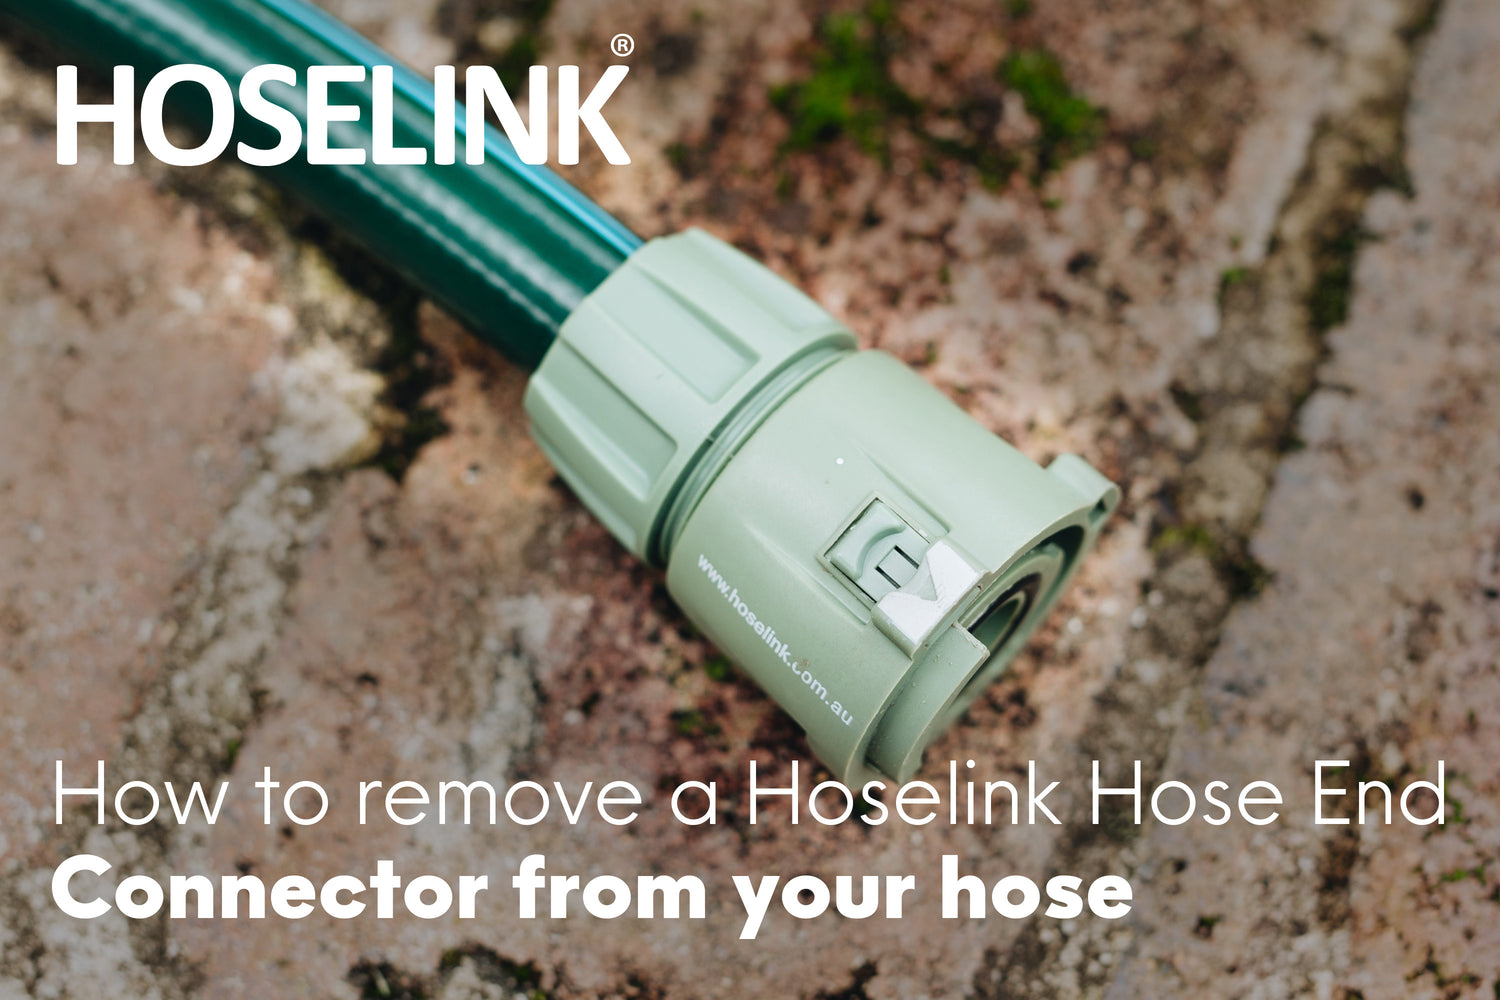 How to remove a Hoselink Hose End Connector from your Hose